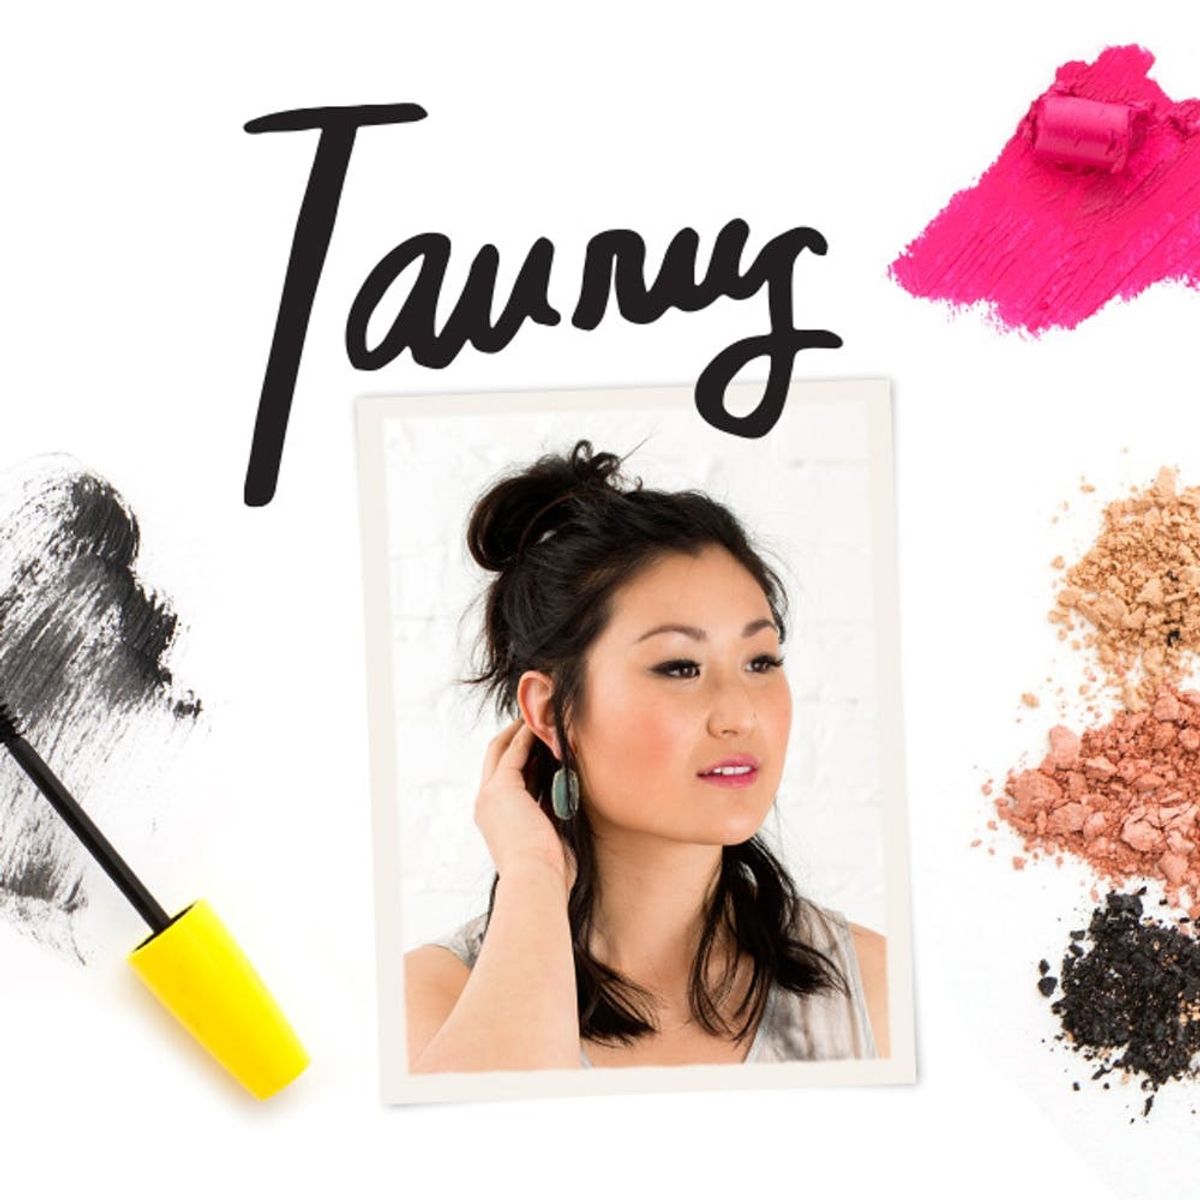 The Best Makeup for Your Zodiac Sign: Taurus Edition